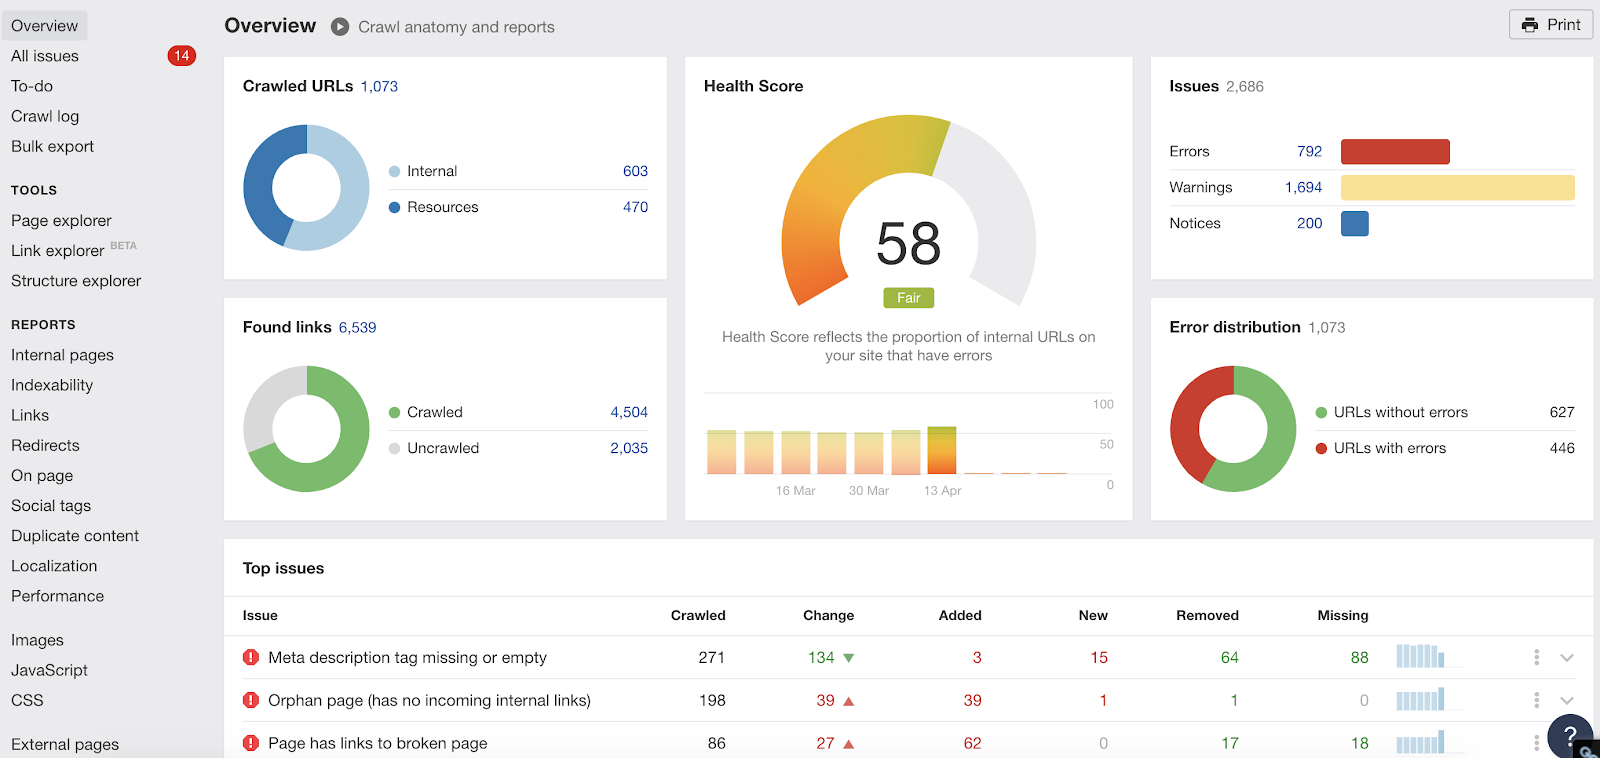 Ahrefs: Site Audit Overview (Crawled URLs, Health Score, Top Issues, Found Links, etc.)